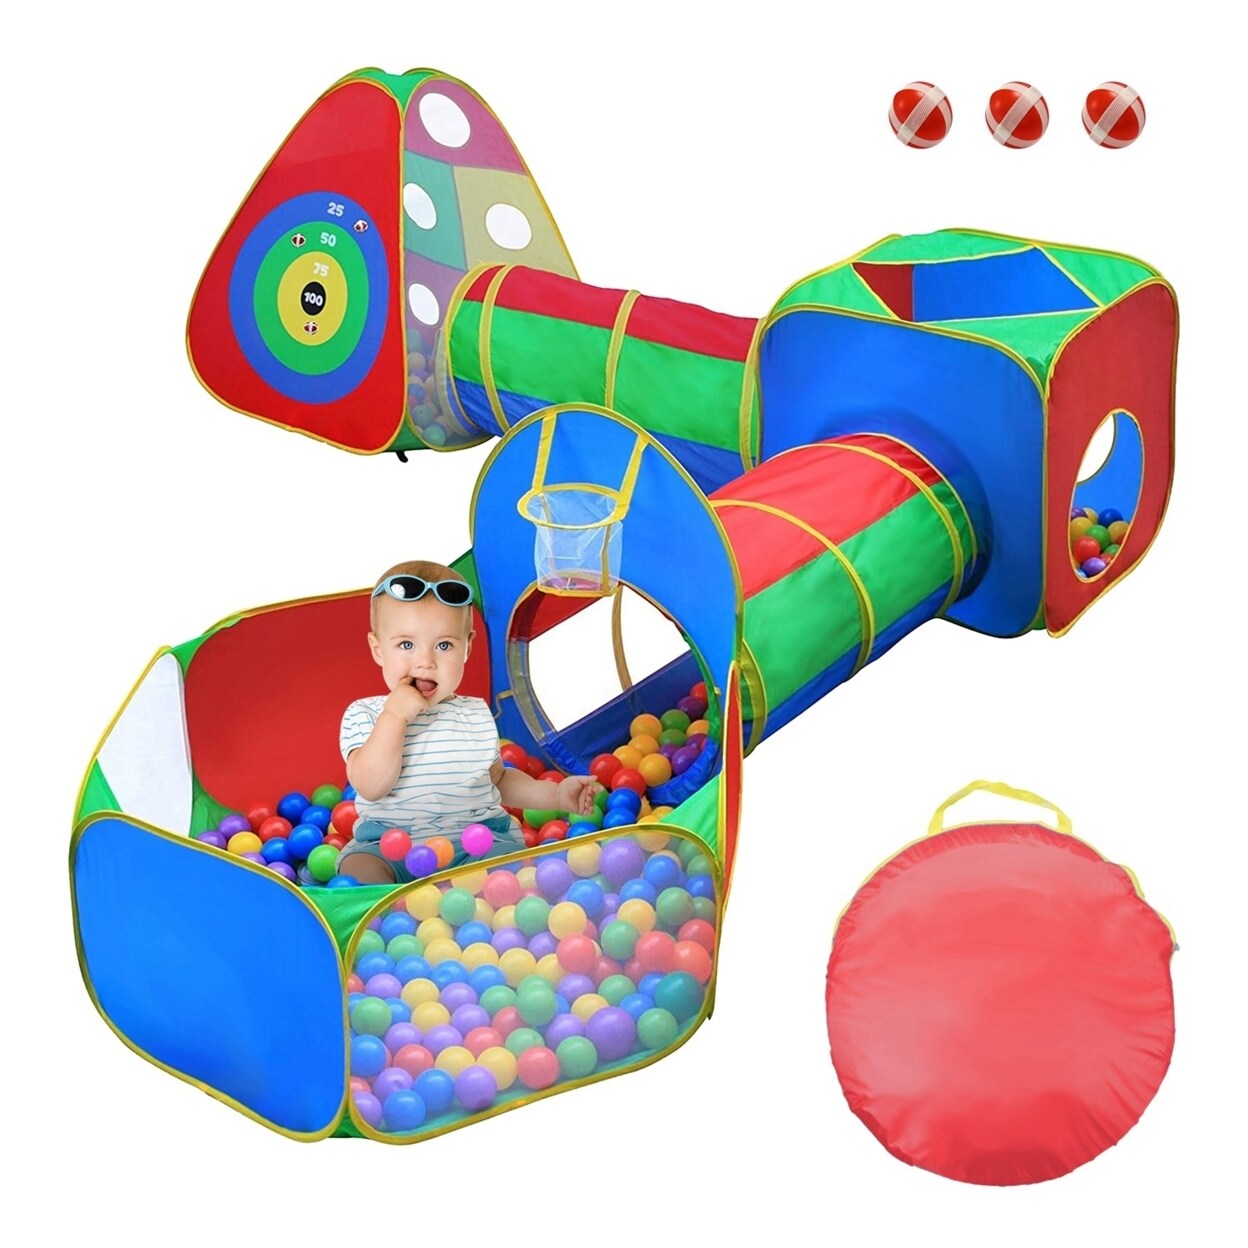 Global Phoenix 5Pcs Kids Ball Pit Tents Pop Up Playhouse with 2 Crawl Tunnel and 2 Tent For Boys Girls Toddlers